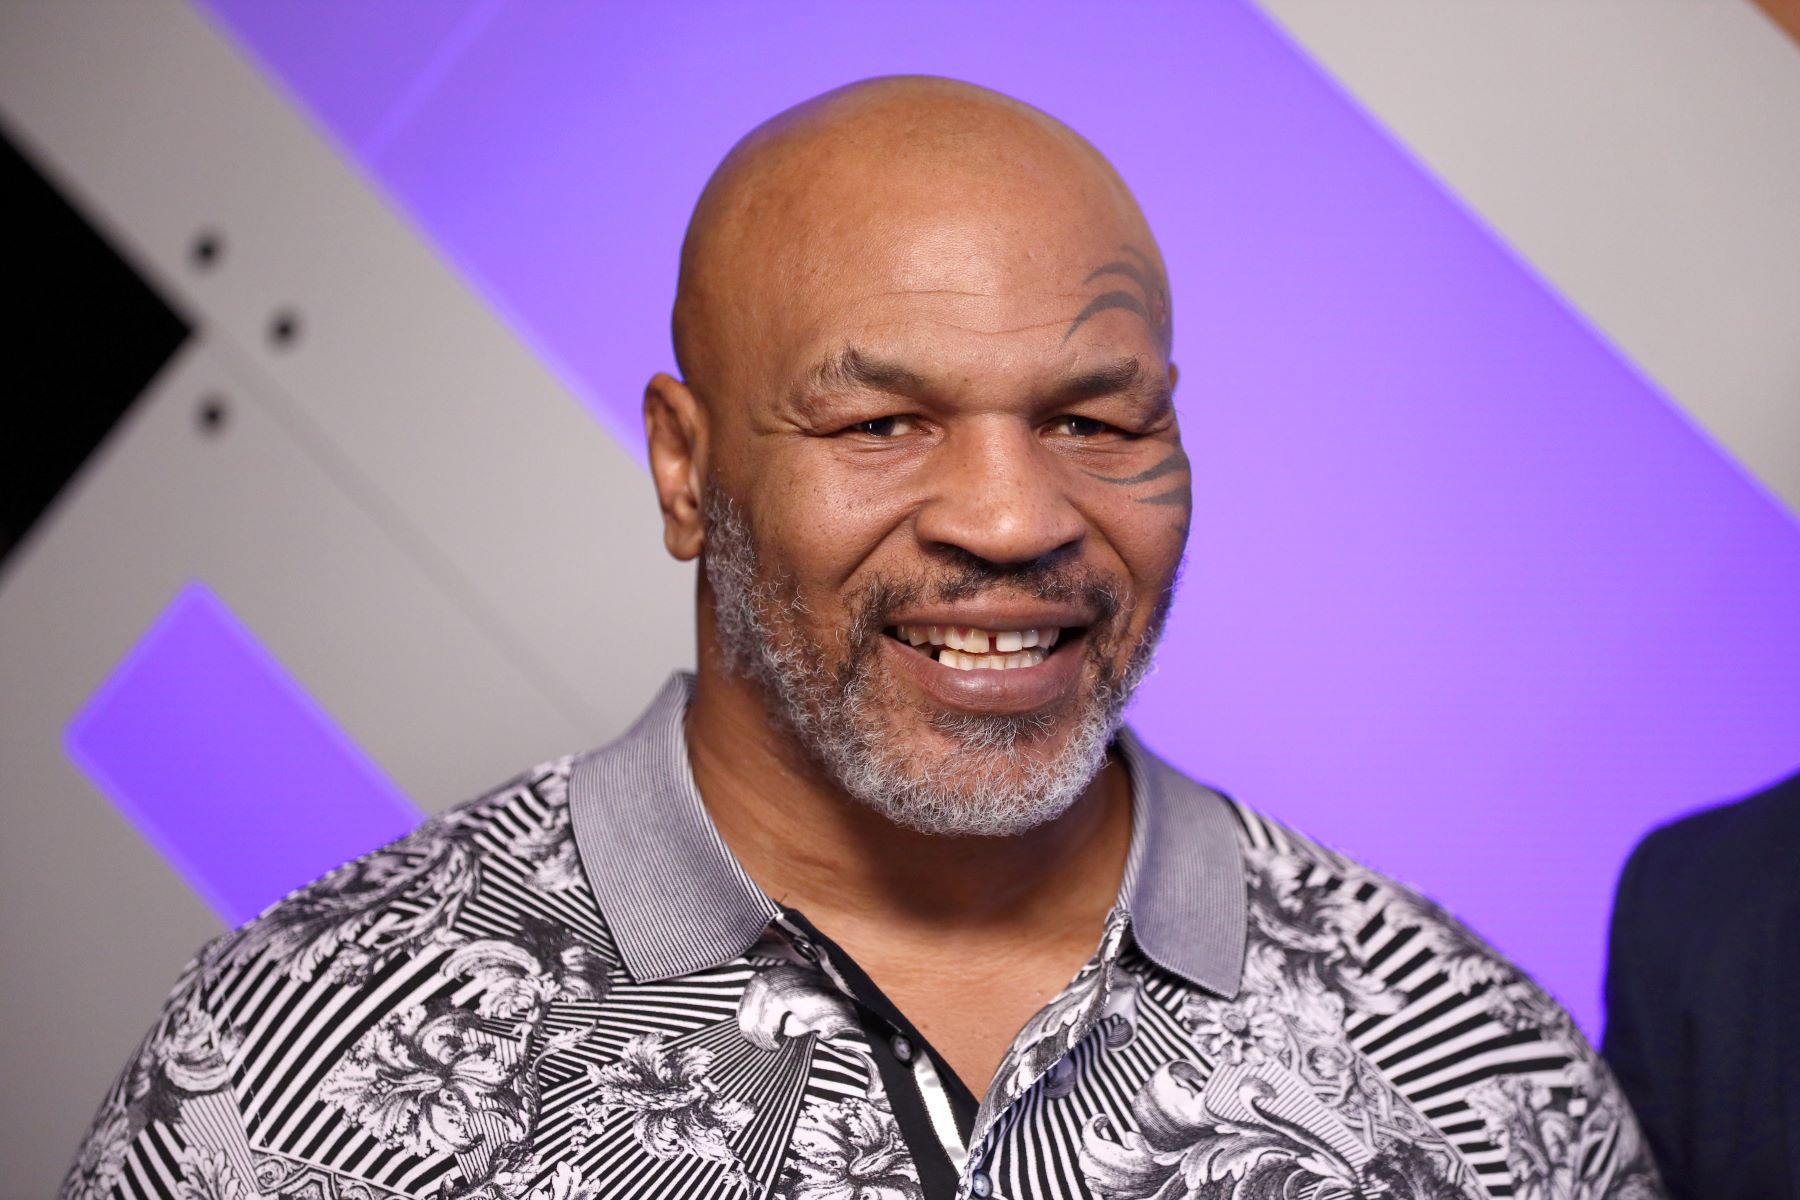 Mike Tyson net worth and image building at the Capital One Podcast Studio for the 2019 iHeartRadio Podcast Awards